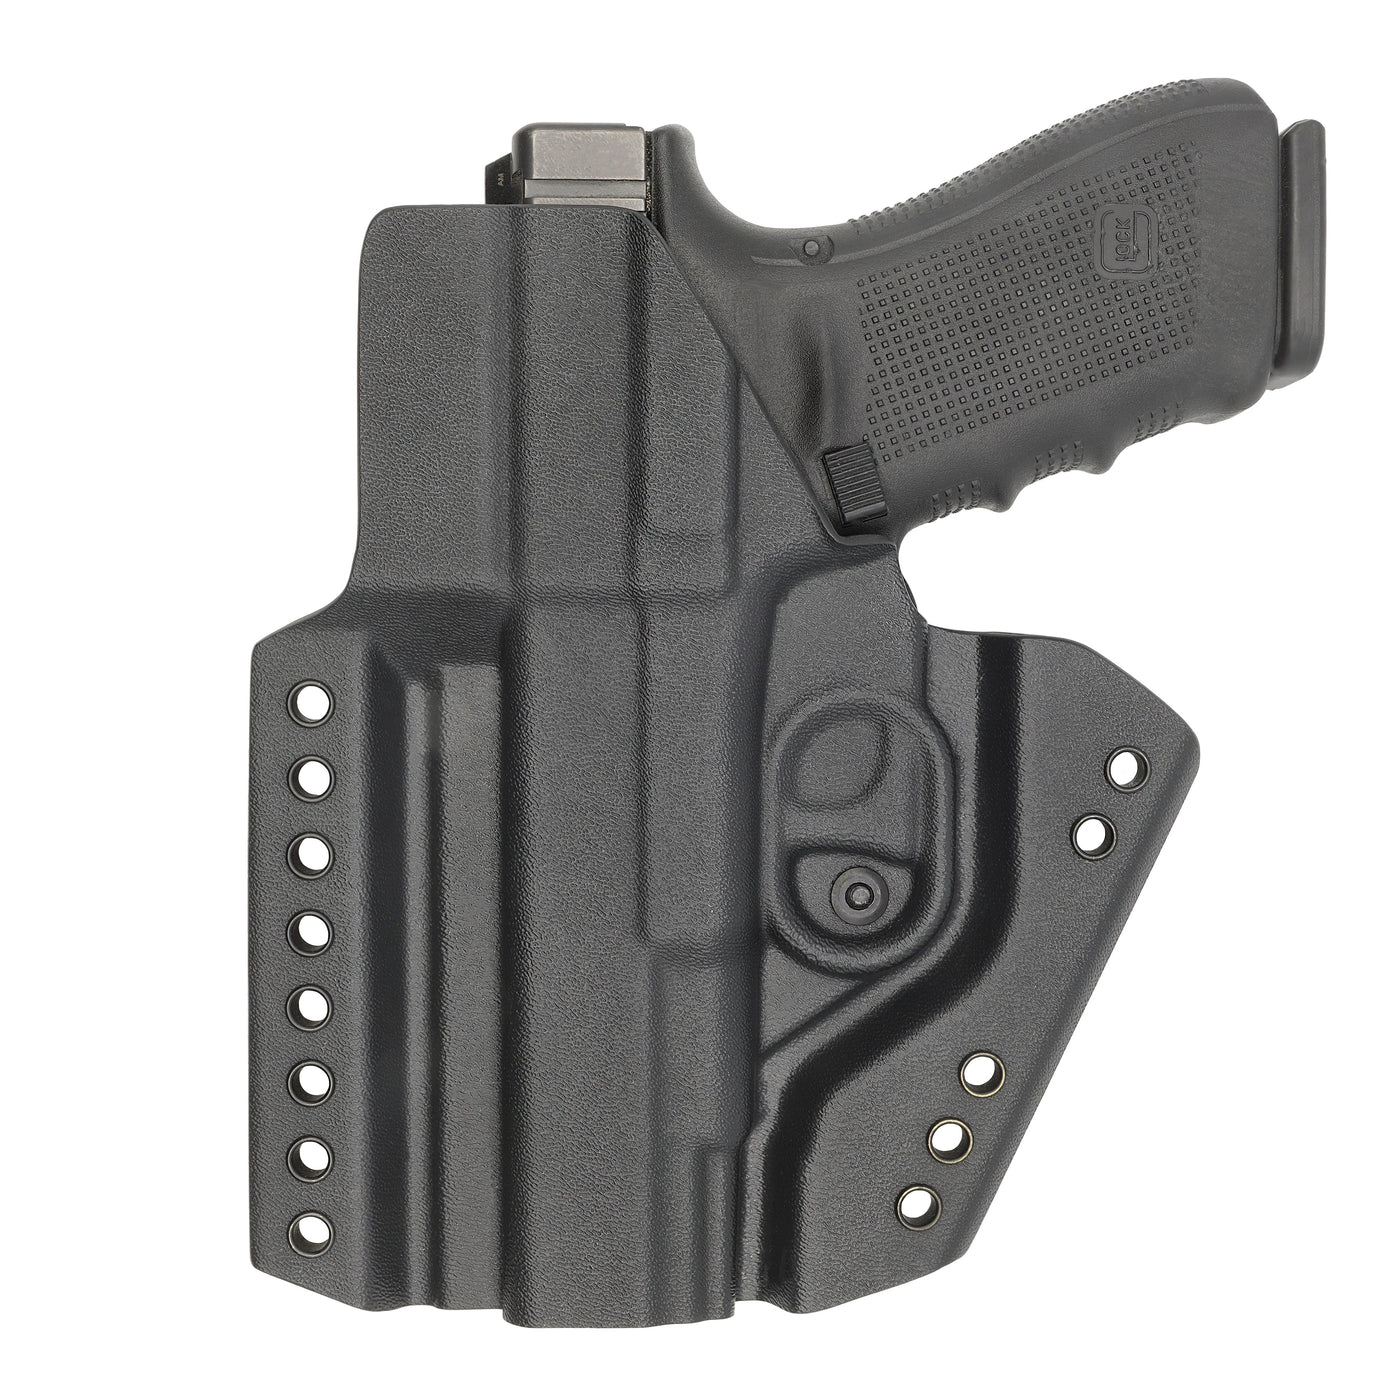 C&G Holsters quickship chest mounted system Glock 20/21 holstered back view